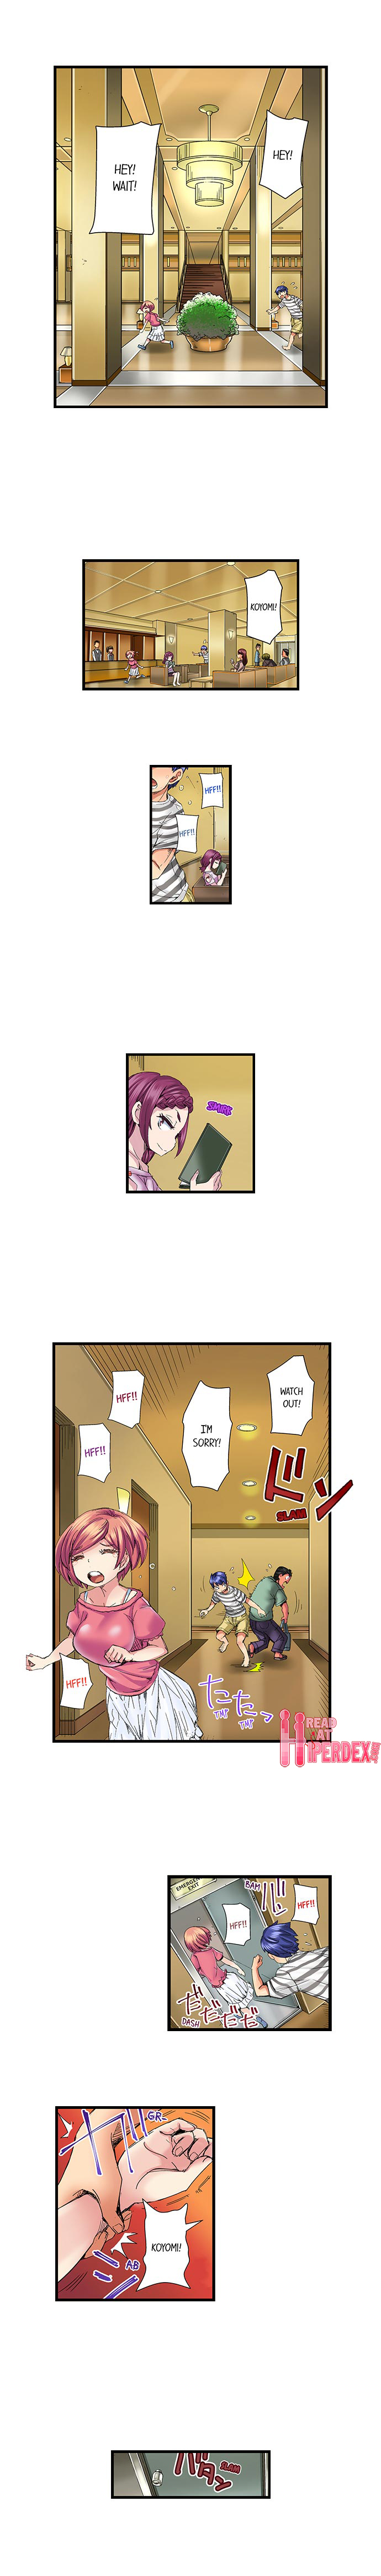 Taking a Hot Tanned Chick’s Virginity - Chapter 31 Page 4